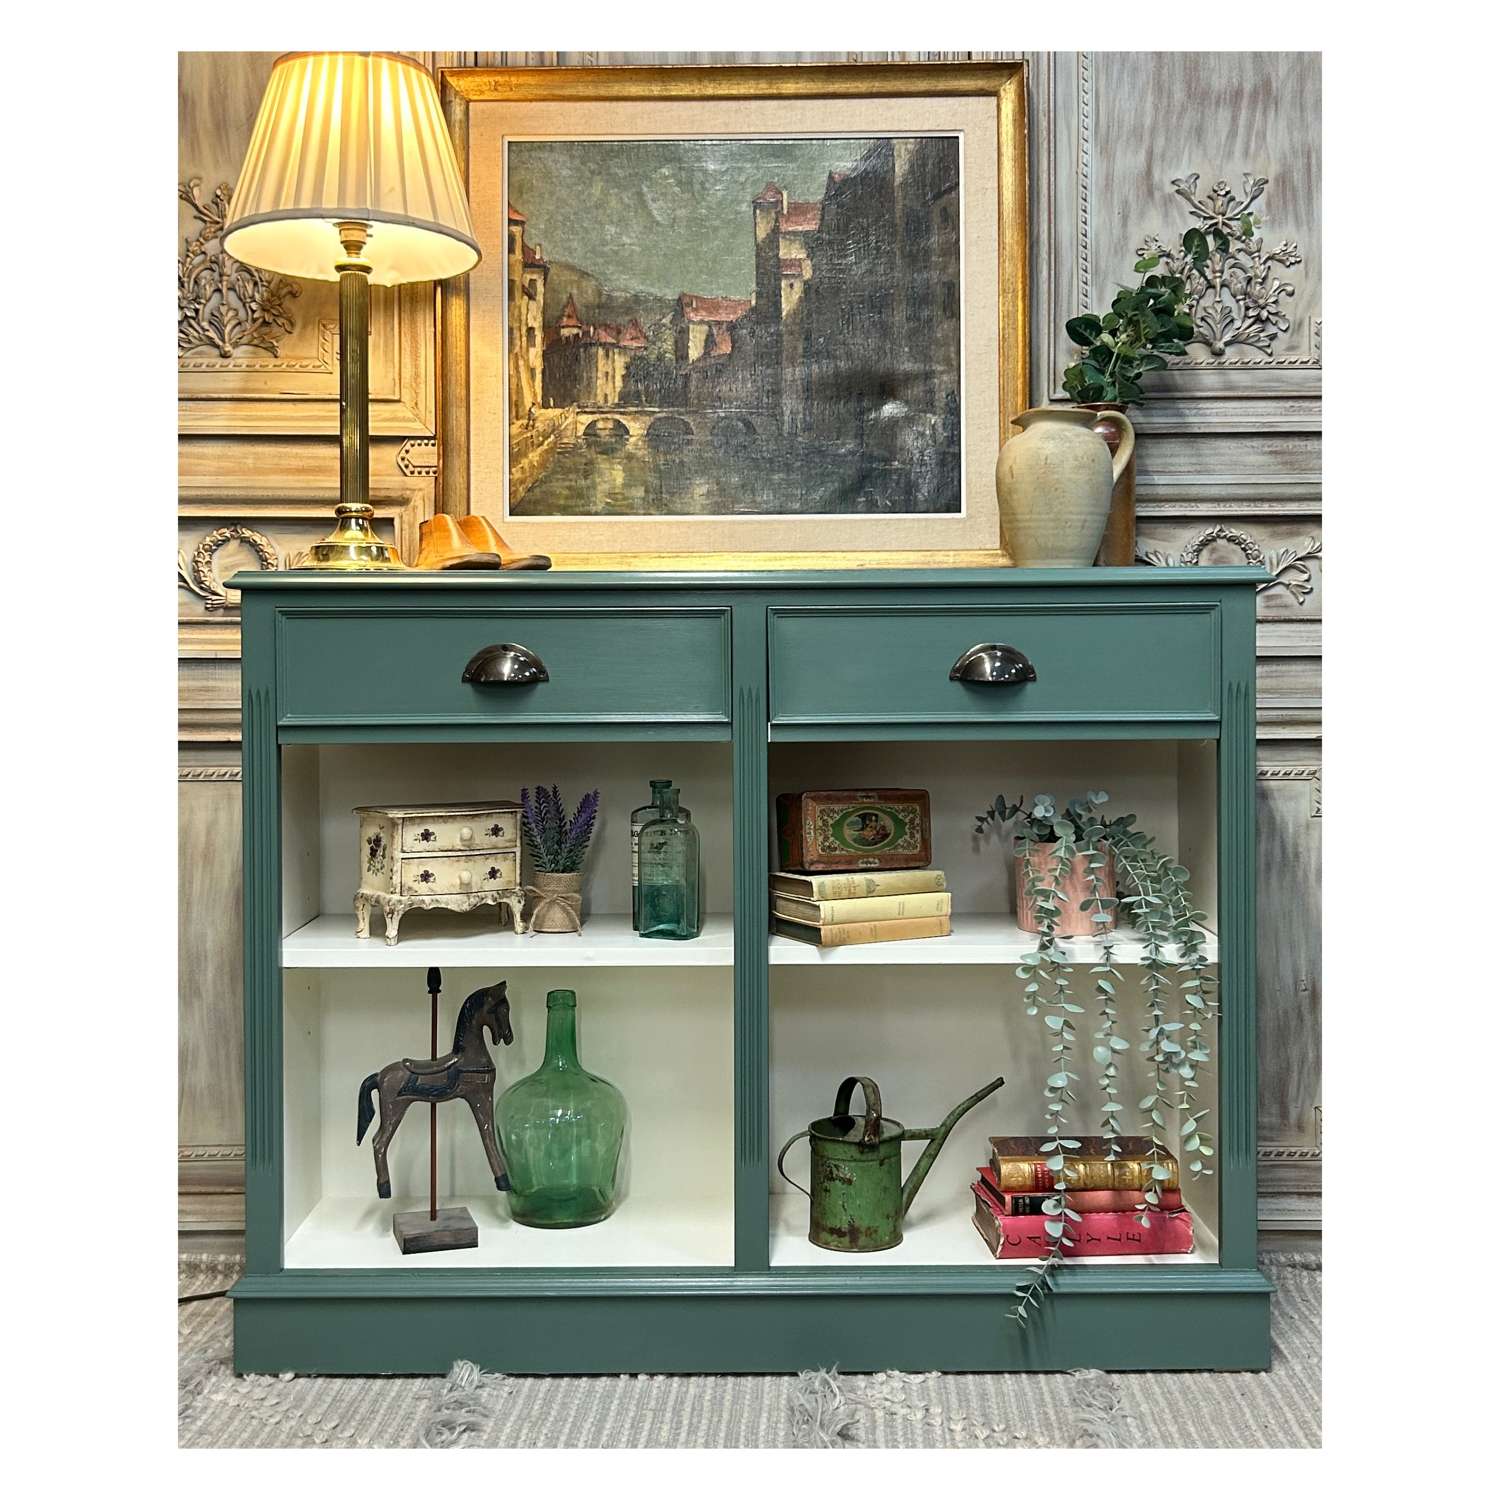 Grey Green and White Painted Bookcase / Console / Sideboard